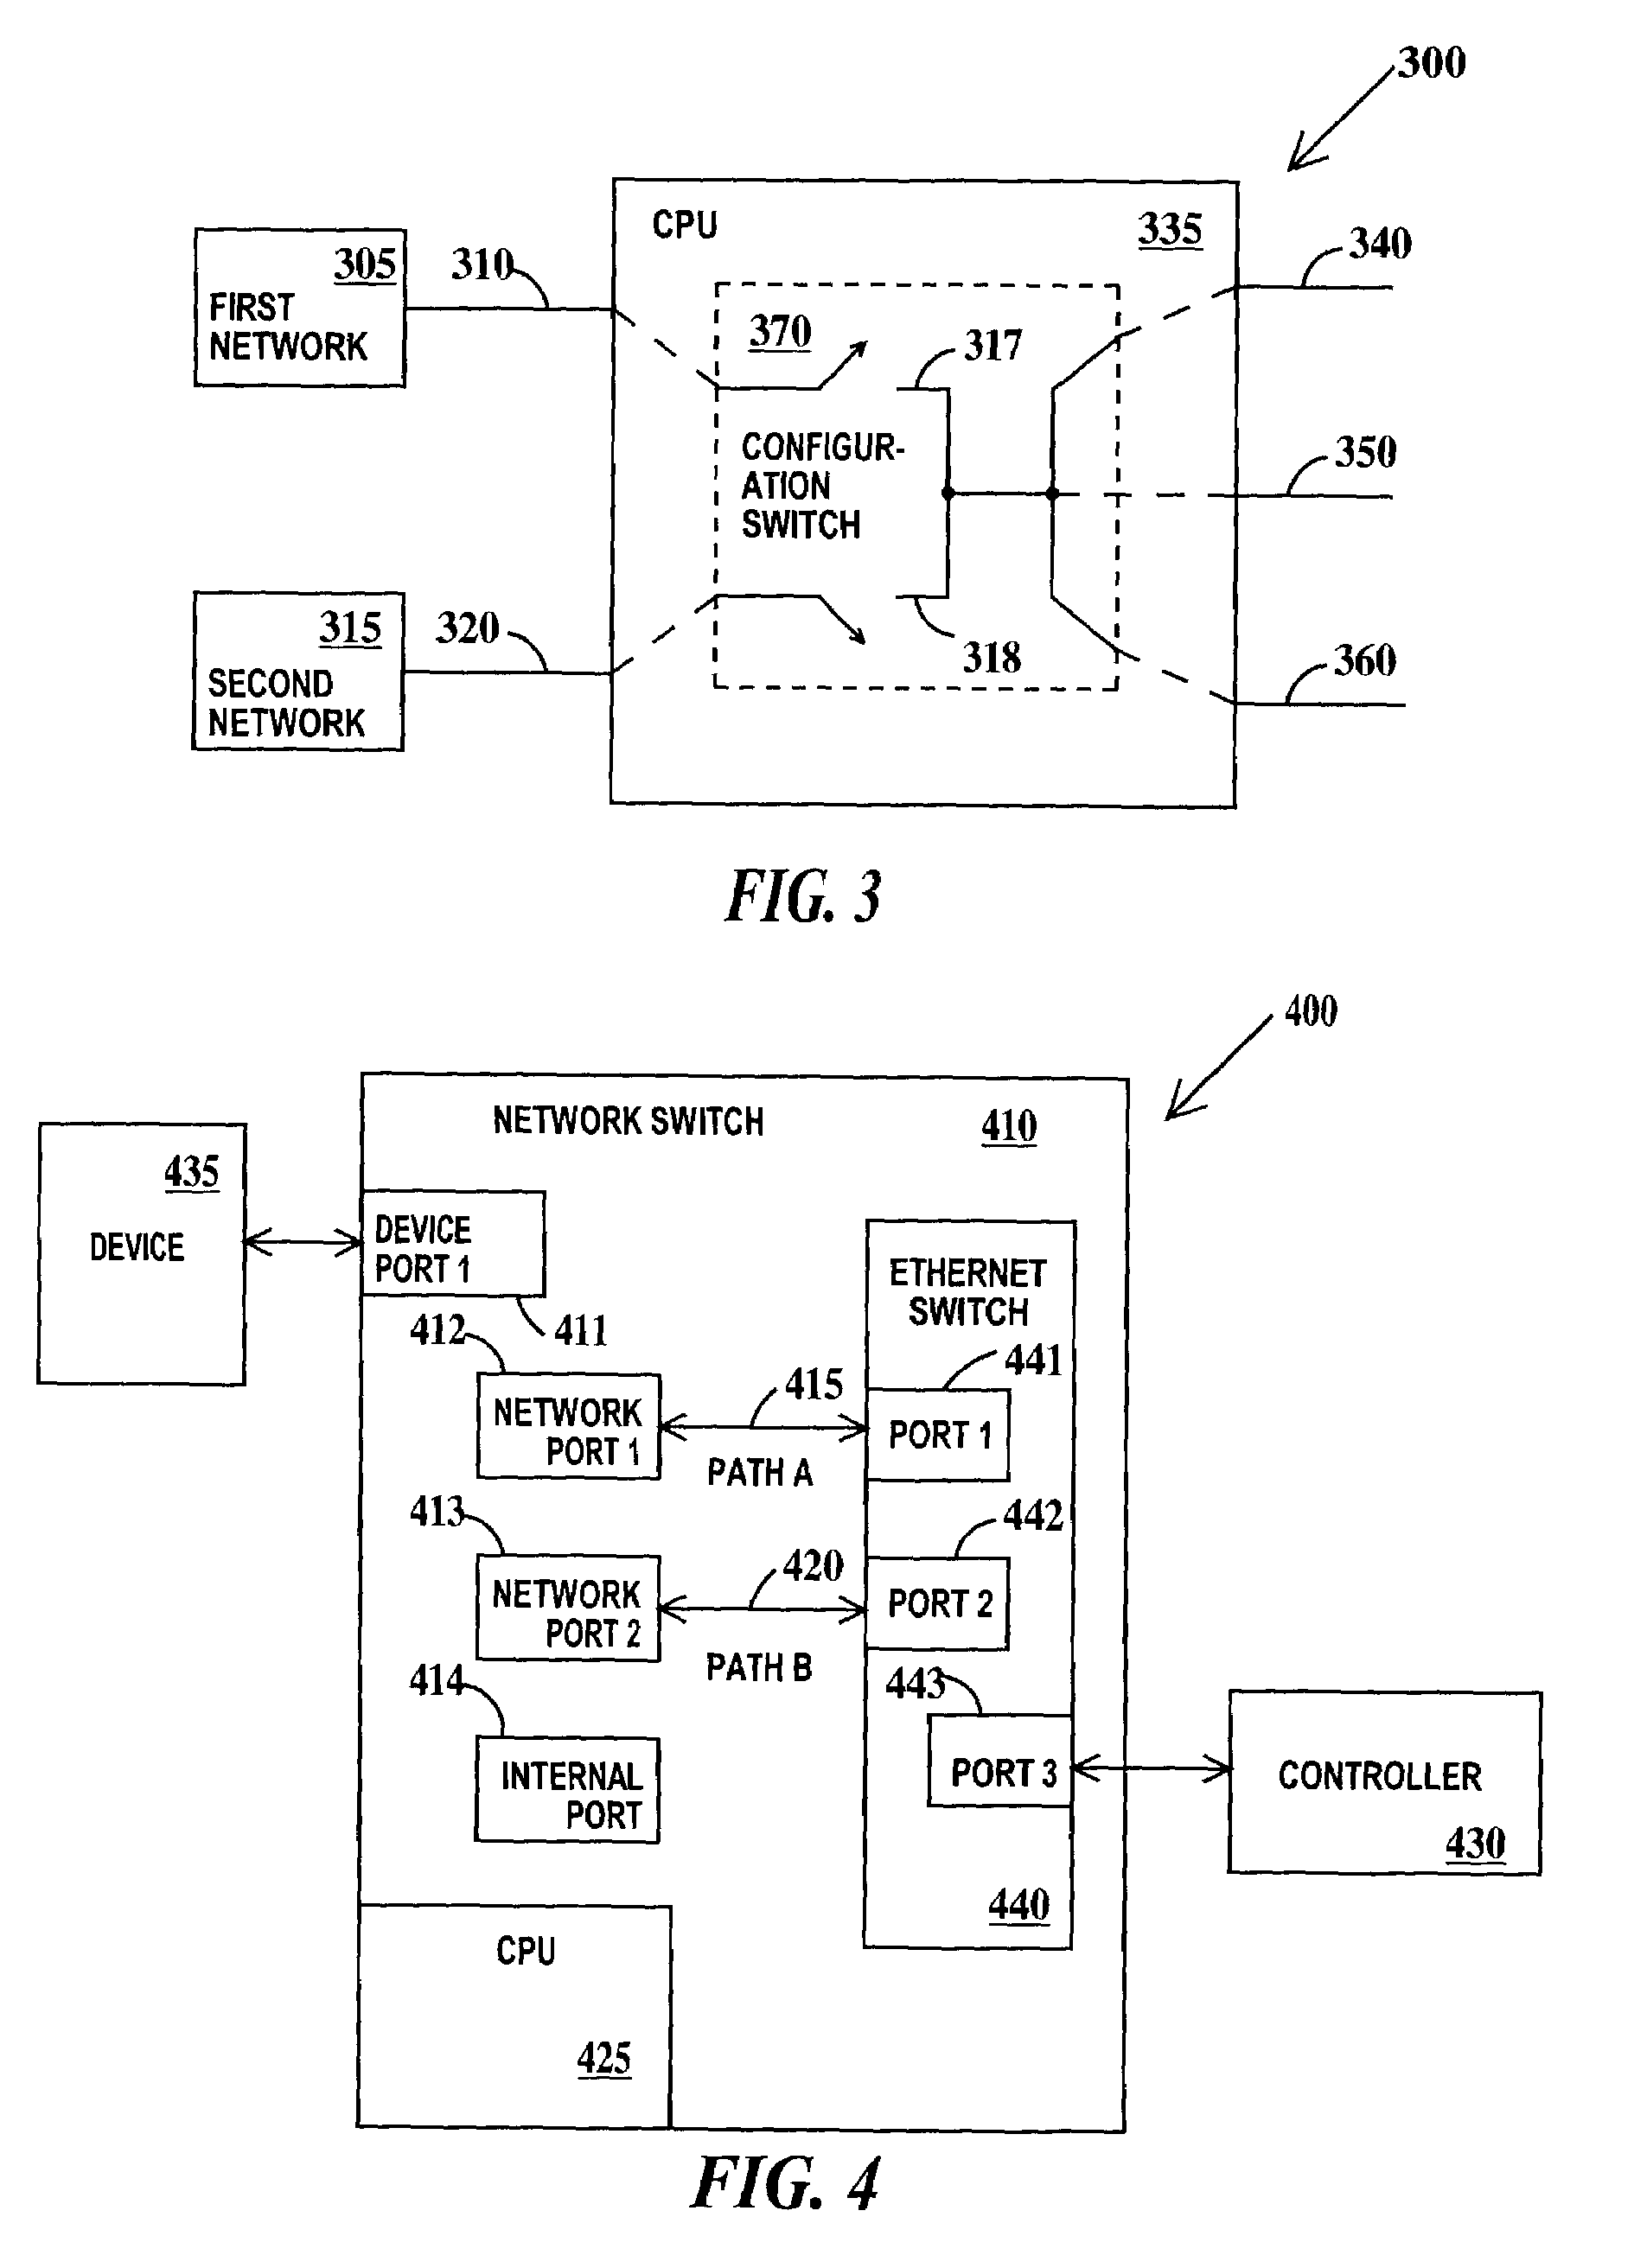 Redundant network interface for ethernet devices